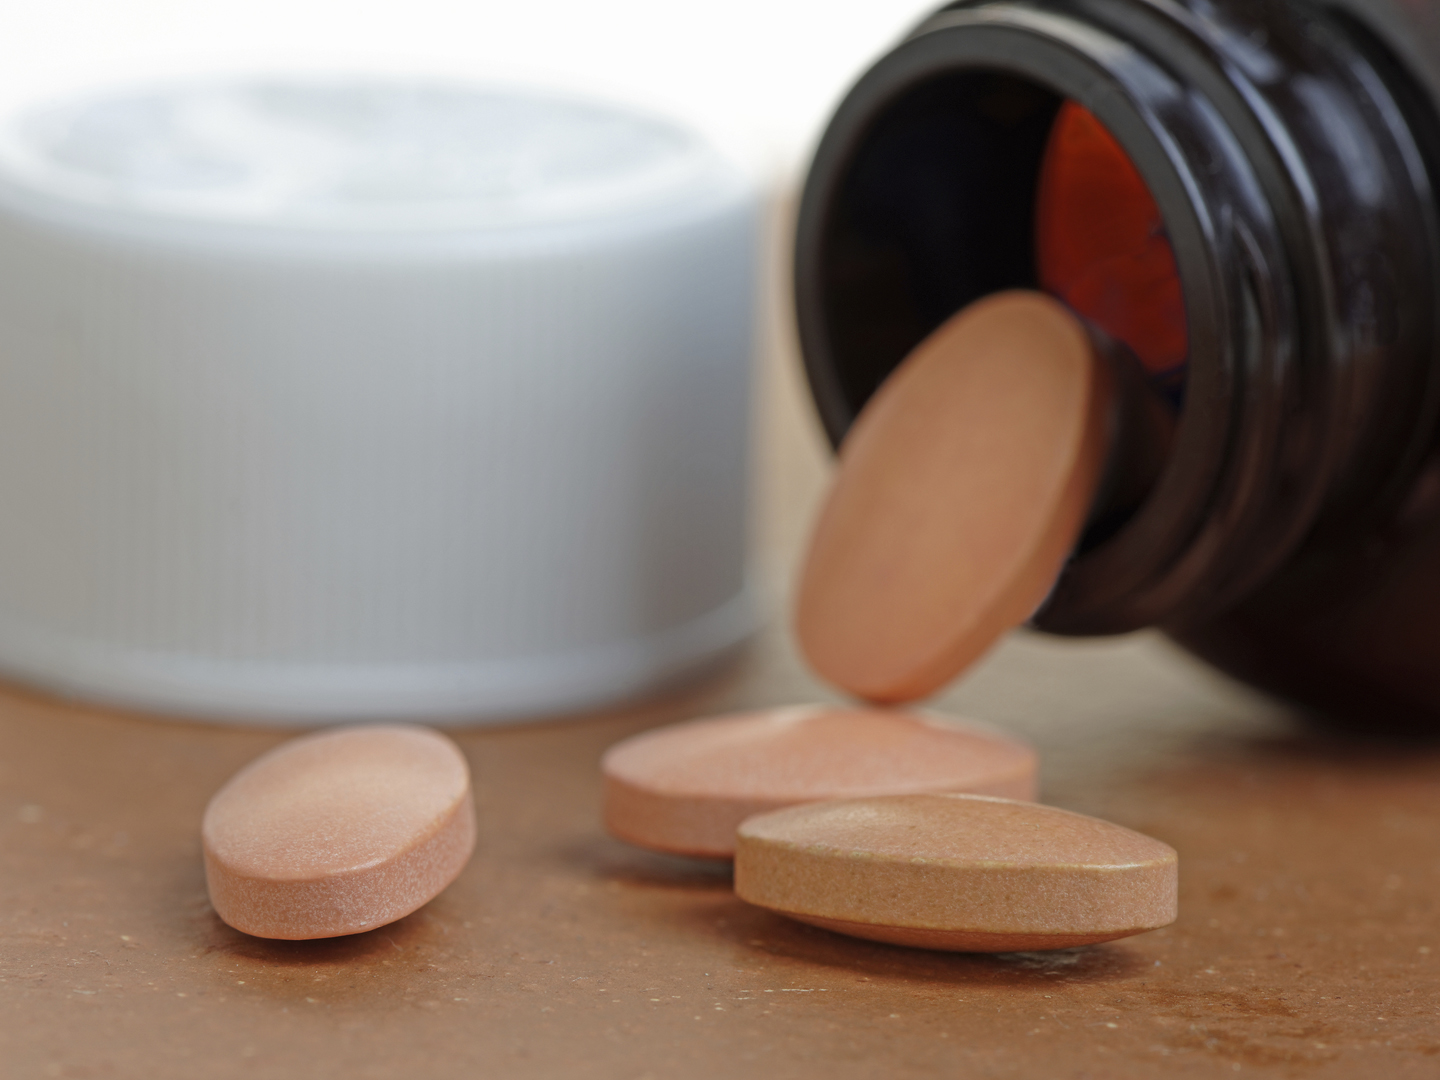 Statins, or generic pills, pouring from a bottle. Close up with shallow depth of field